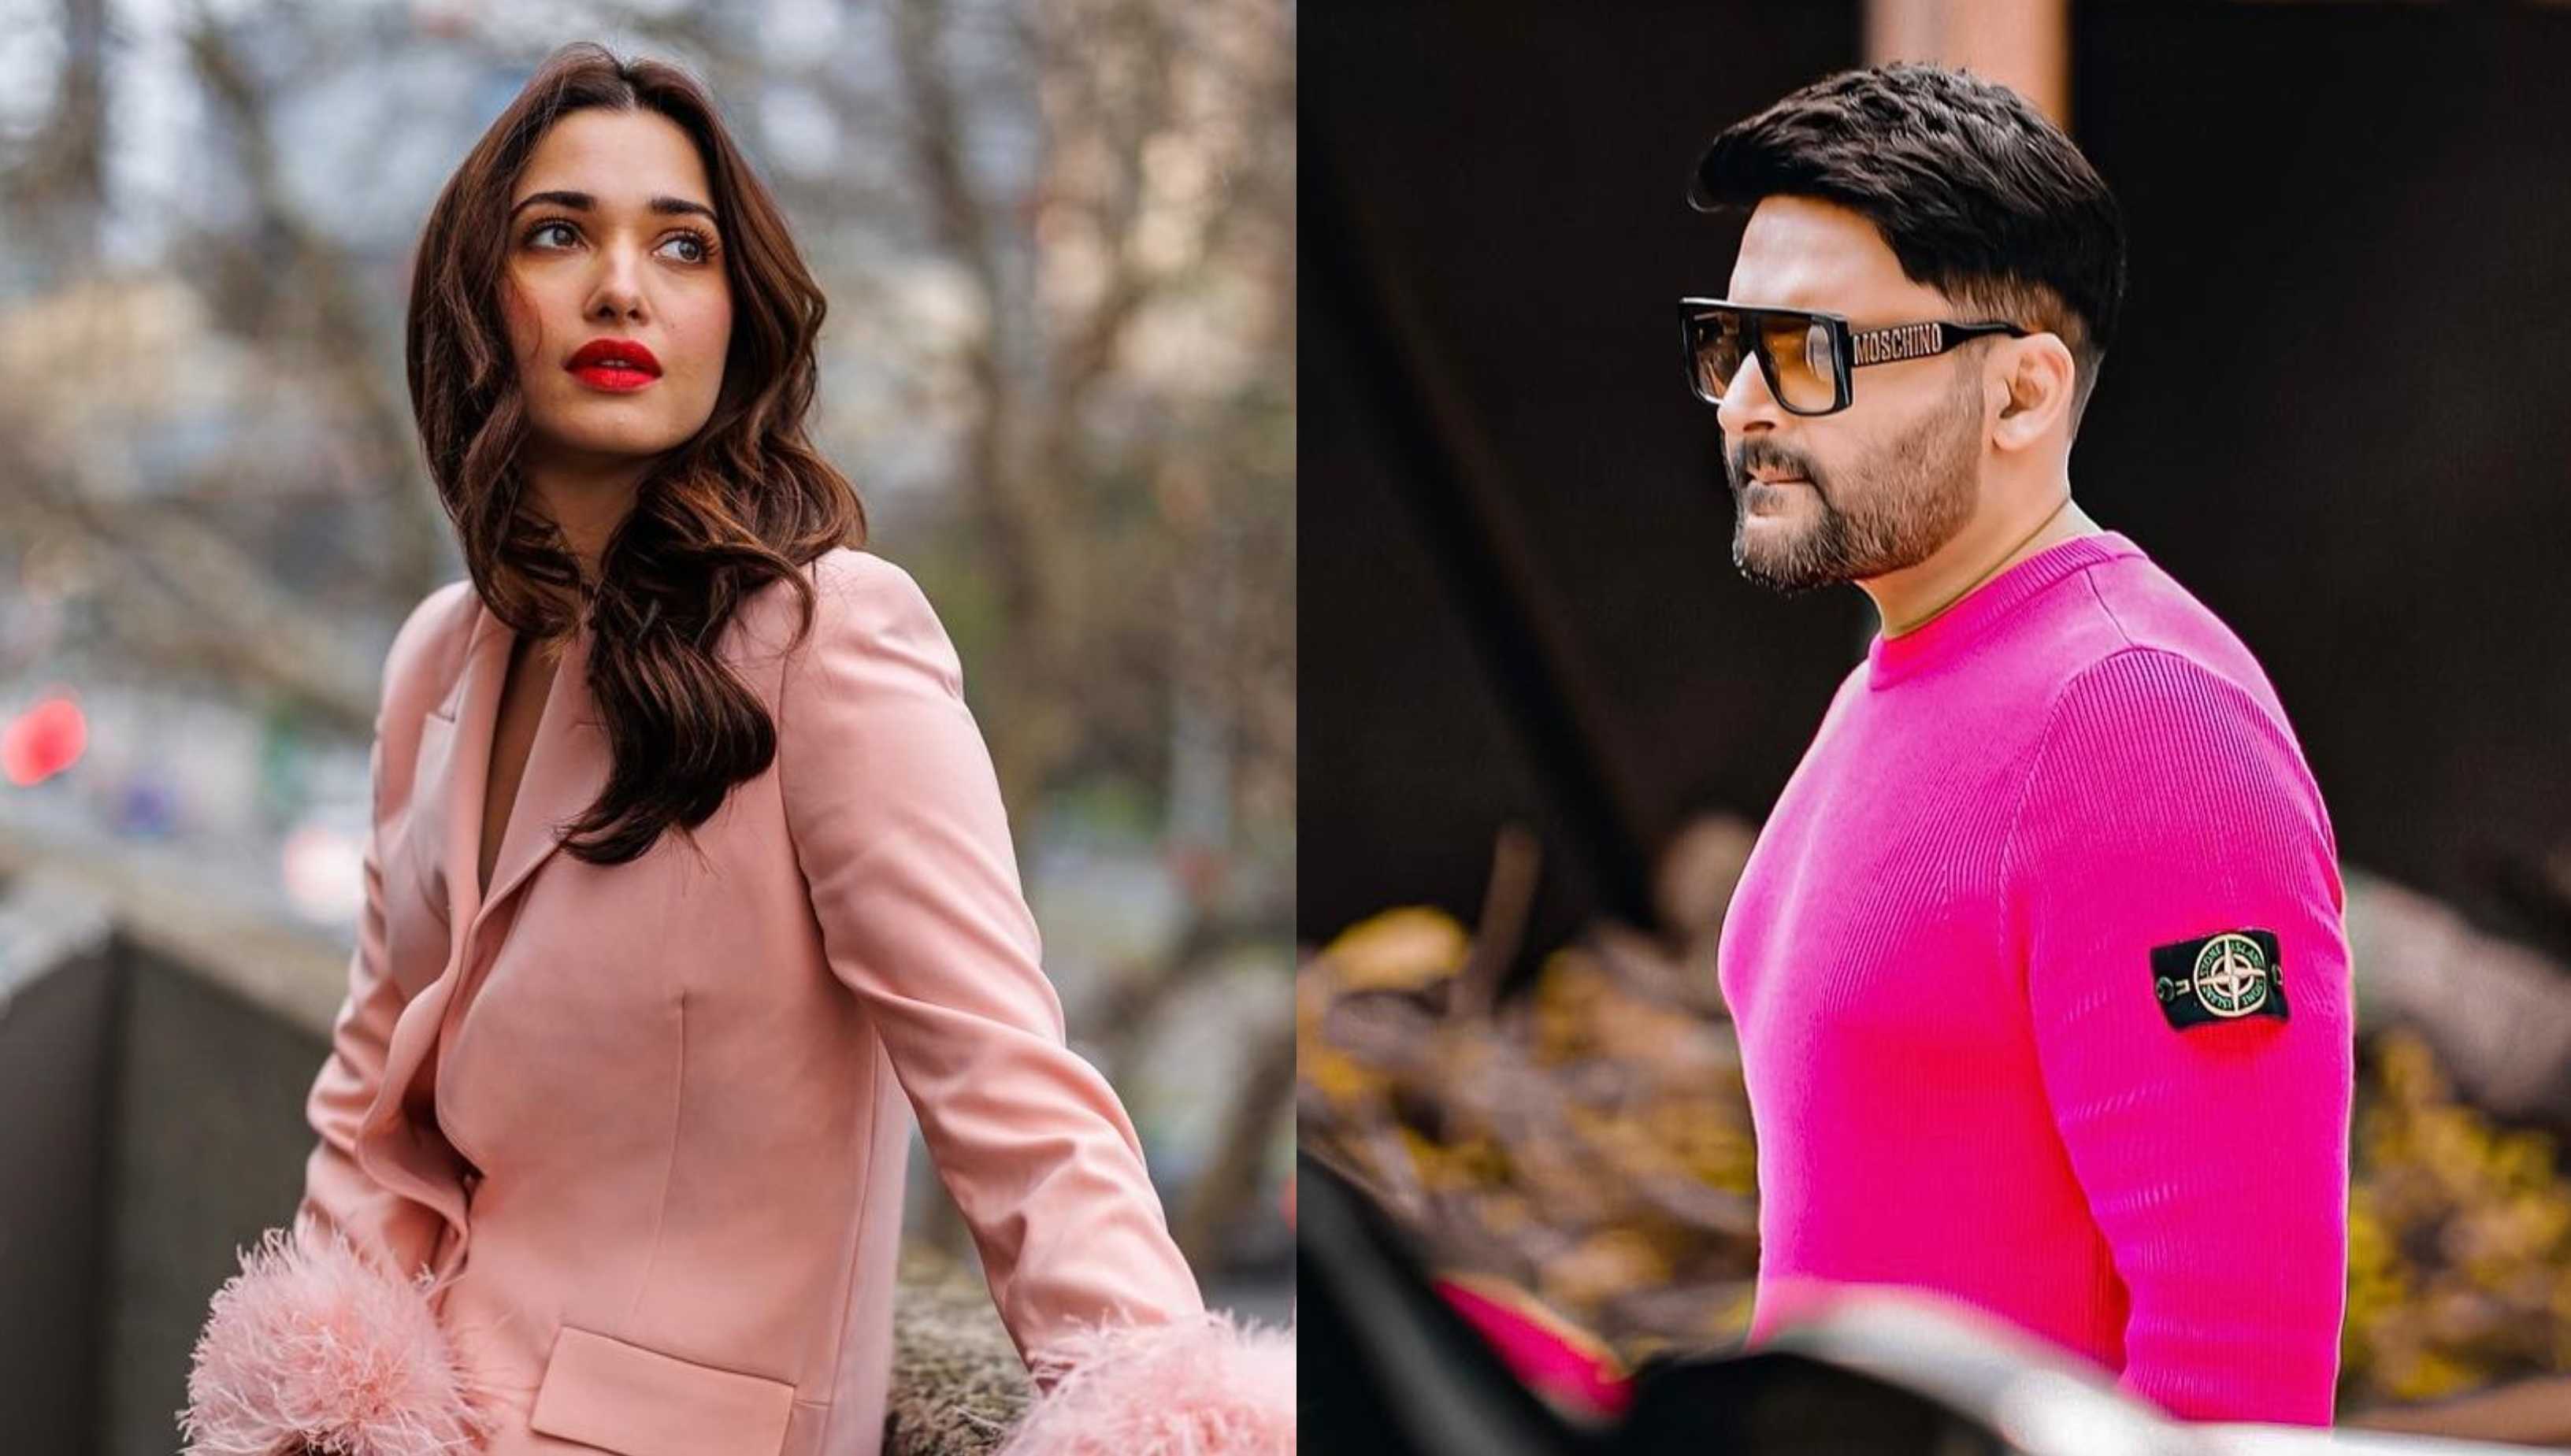 Kapil Sharma pops in pink to break a stereotype, wants Tamannaah Bhatia to pay attention